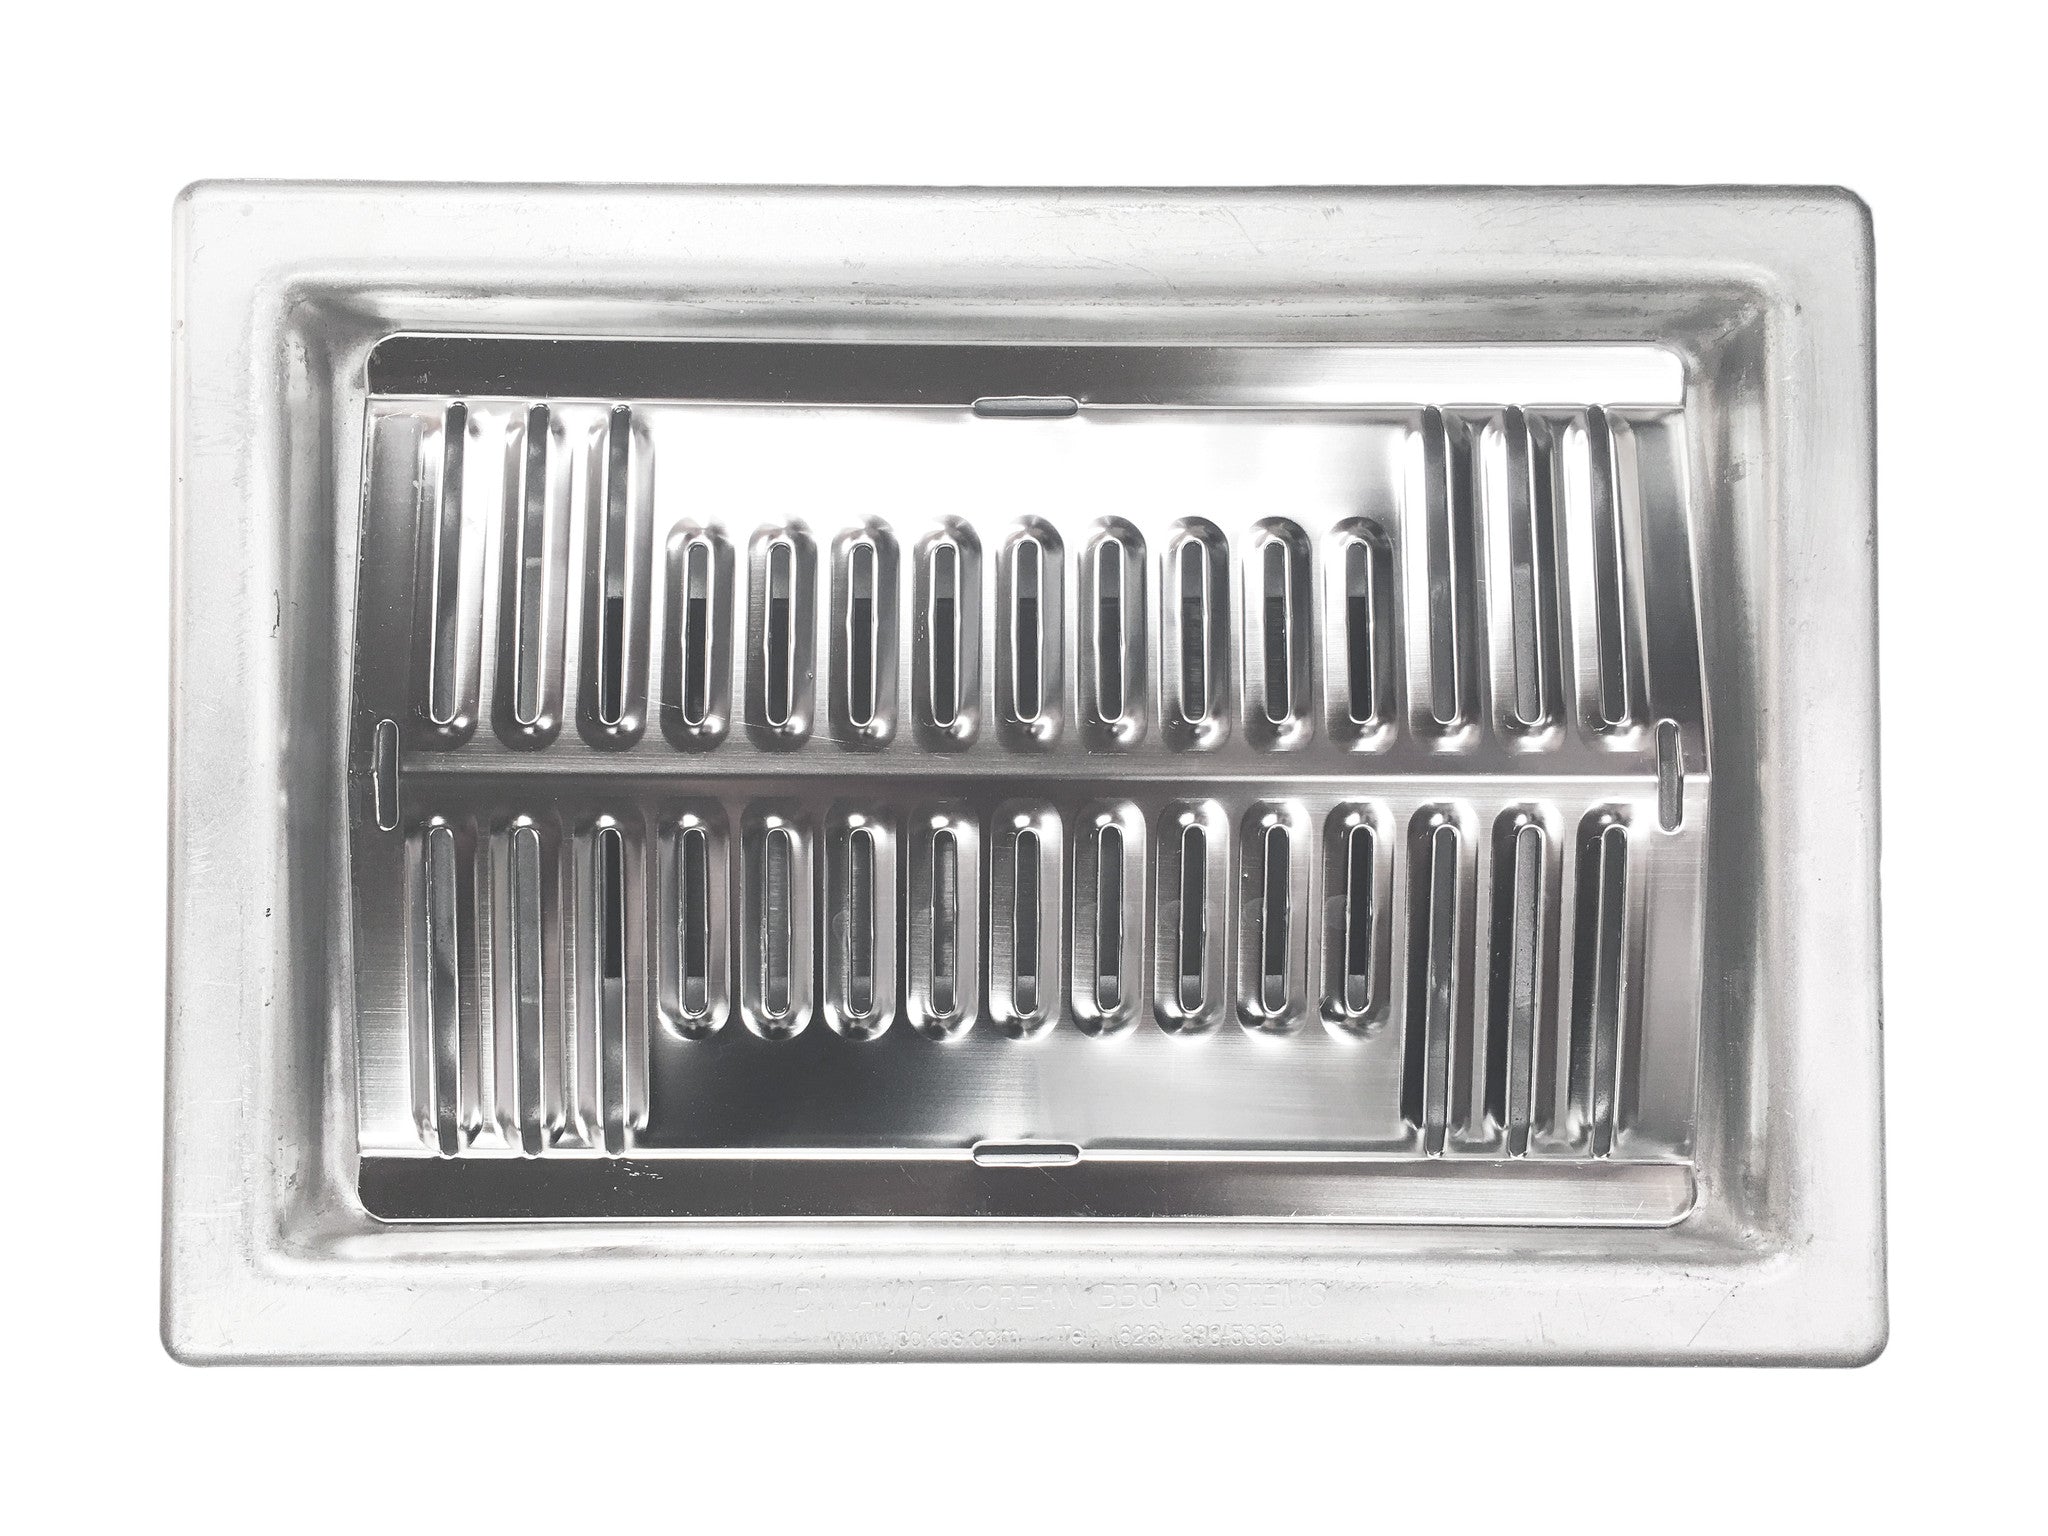 Stainless Steel Korean Bbq Rectangle Grill Plate, Stainless Steel - eKitchenary